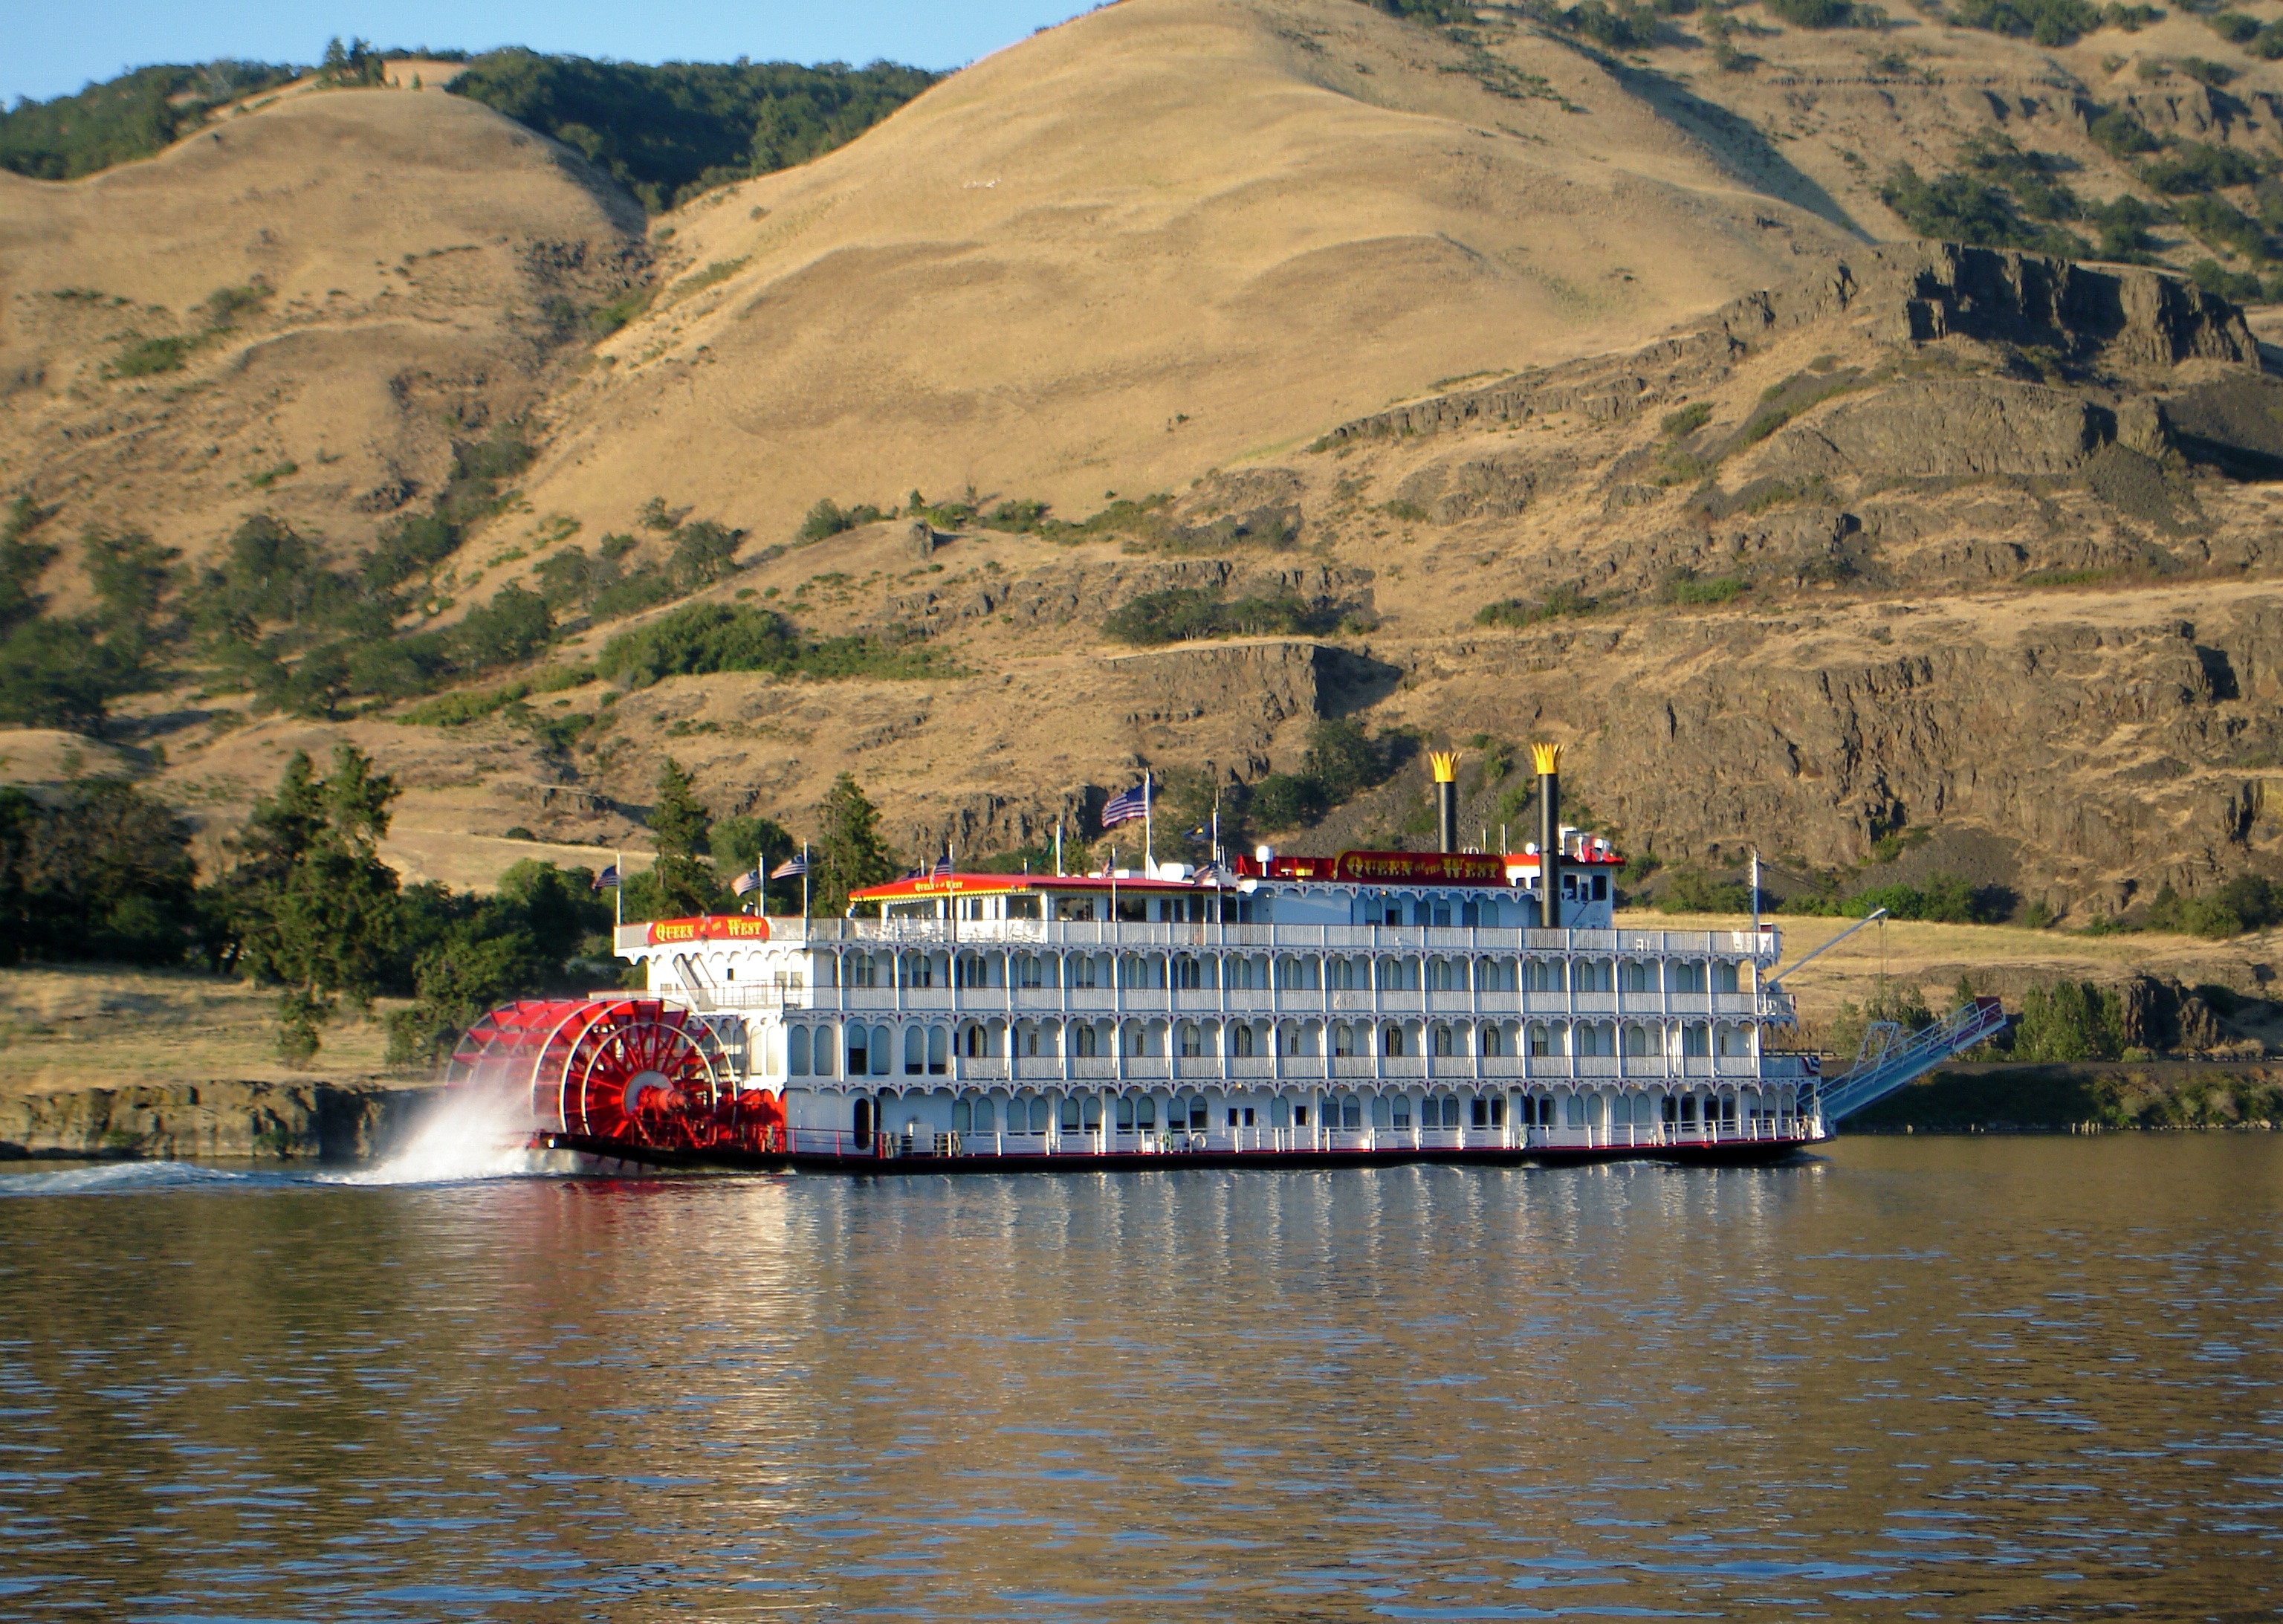 Sternwheeler Queen of the West on the Columbia near Hood River in 2006